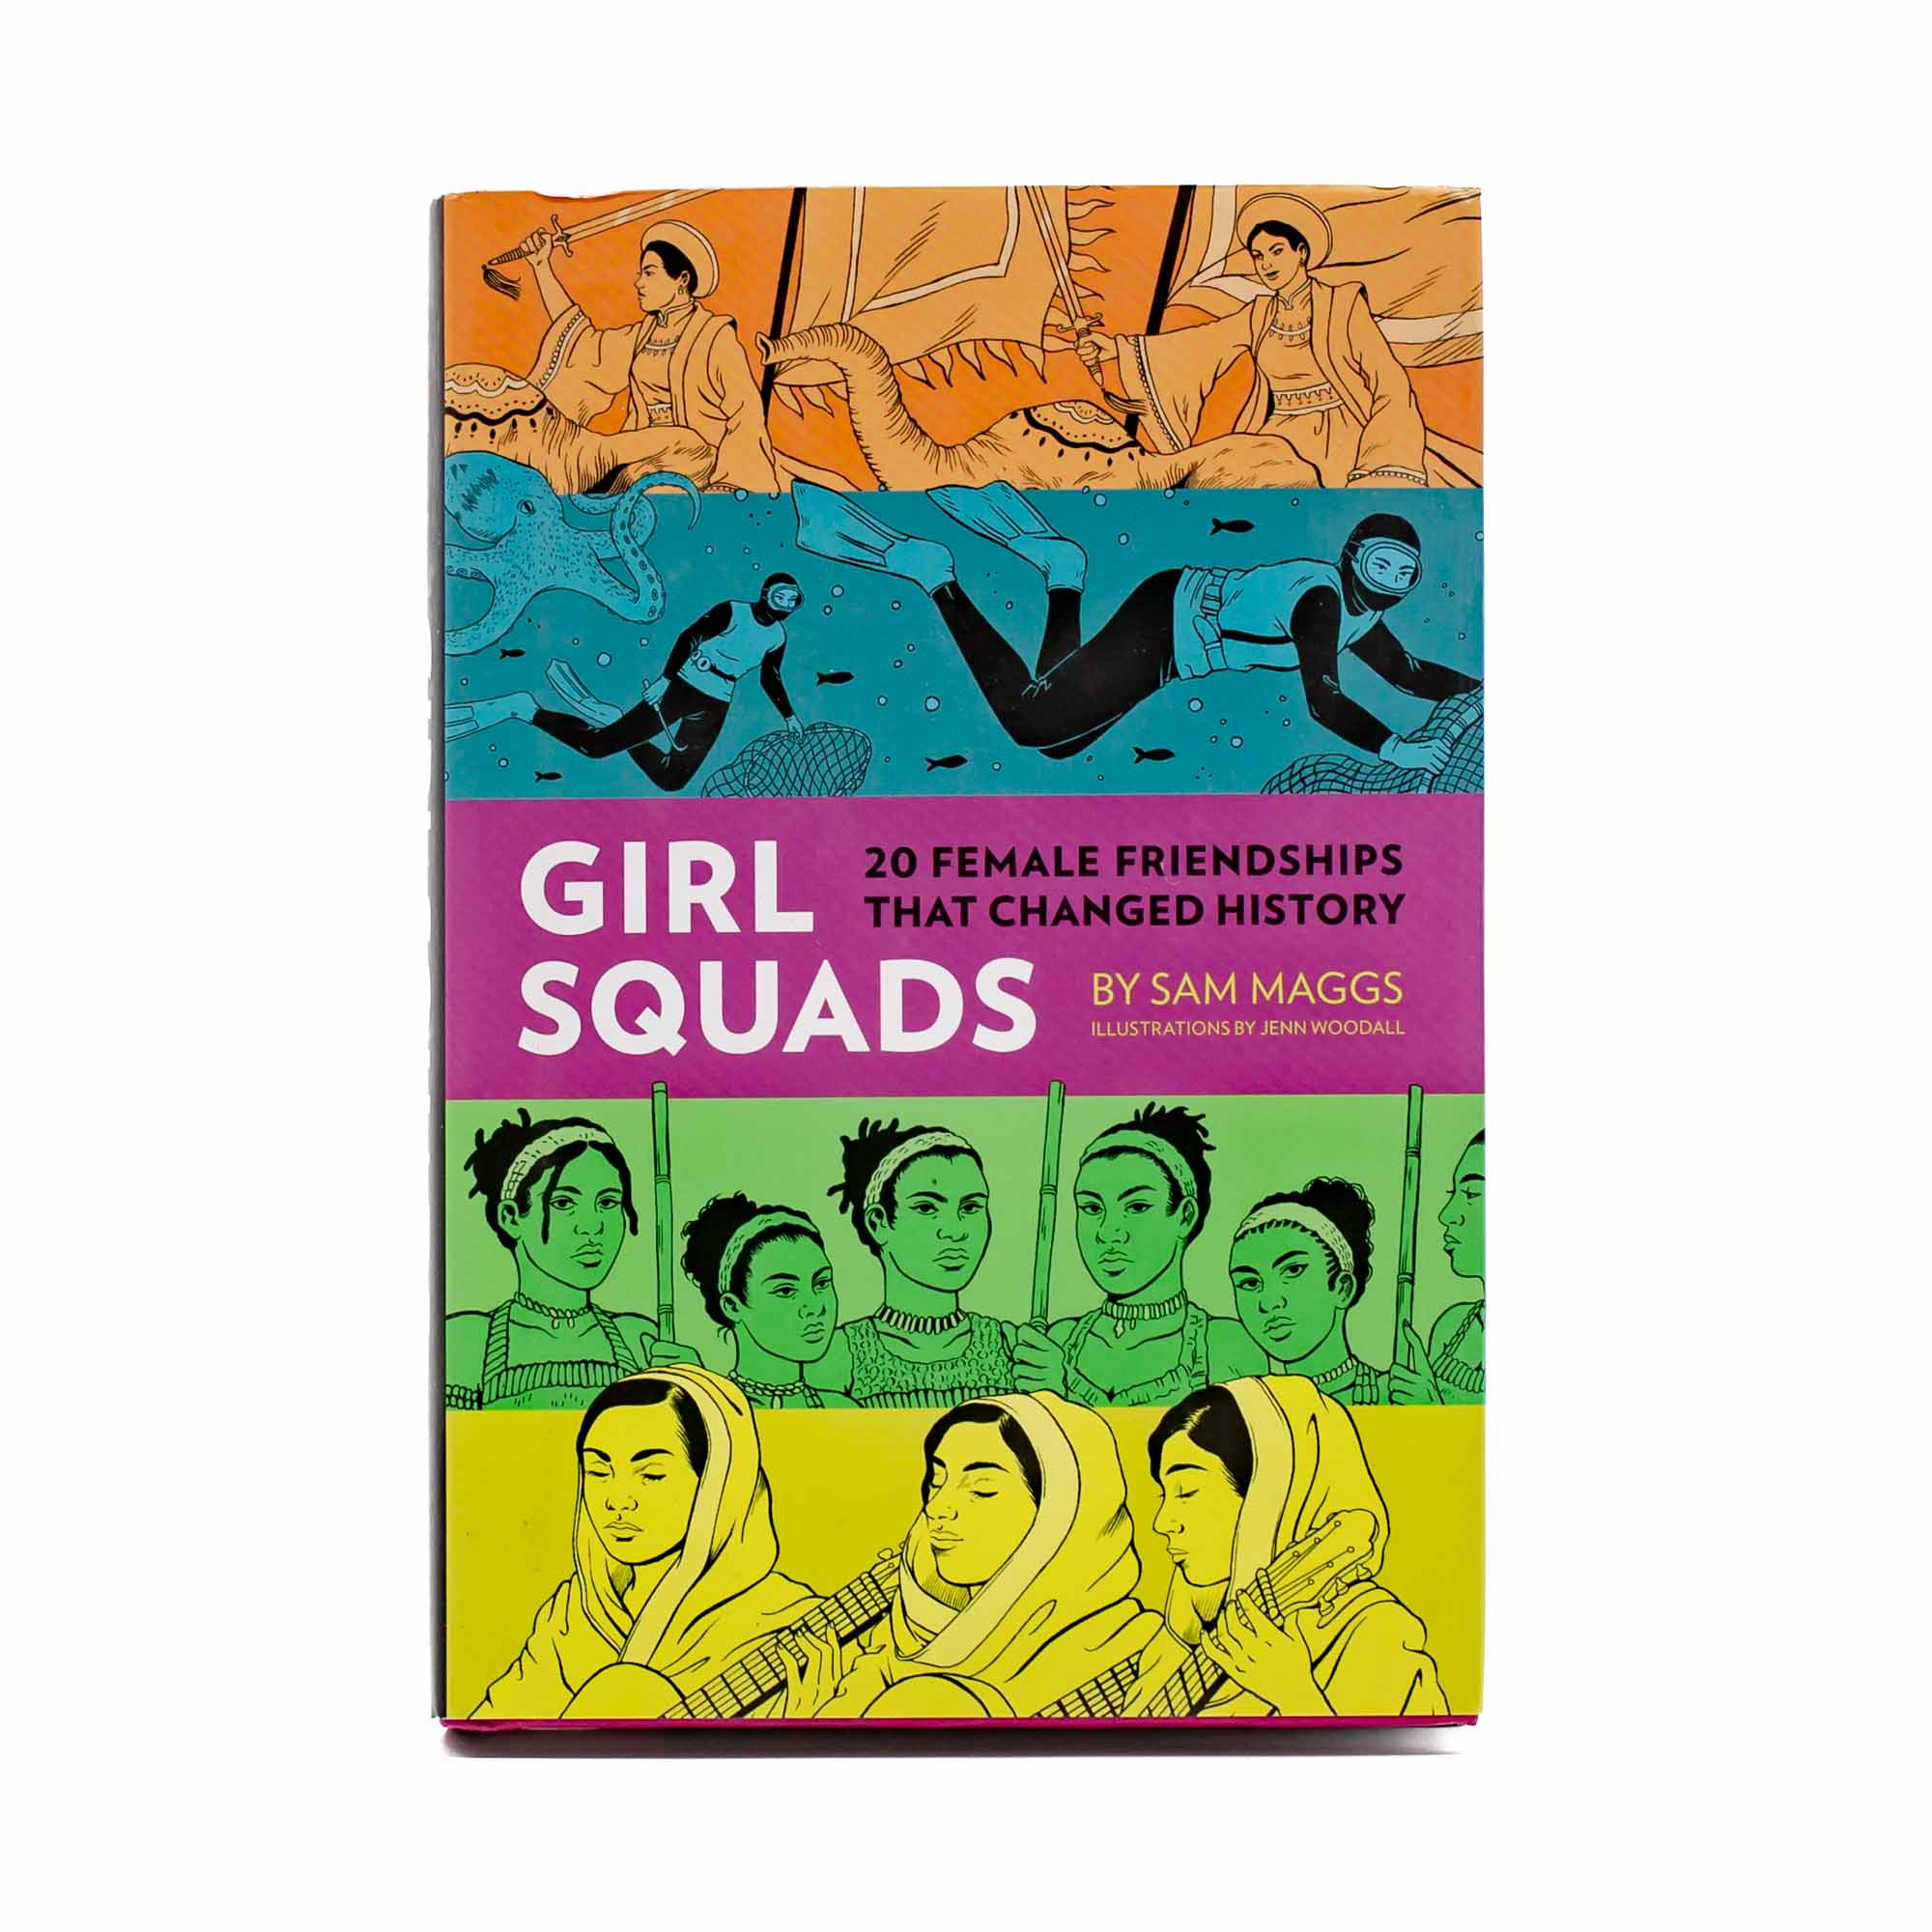 Girl Squads: 20 Female Friendships That Changed History by Sam Maggs - Mortise And Tenon